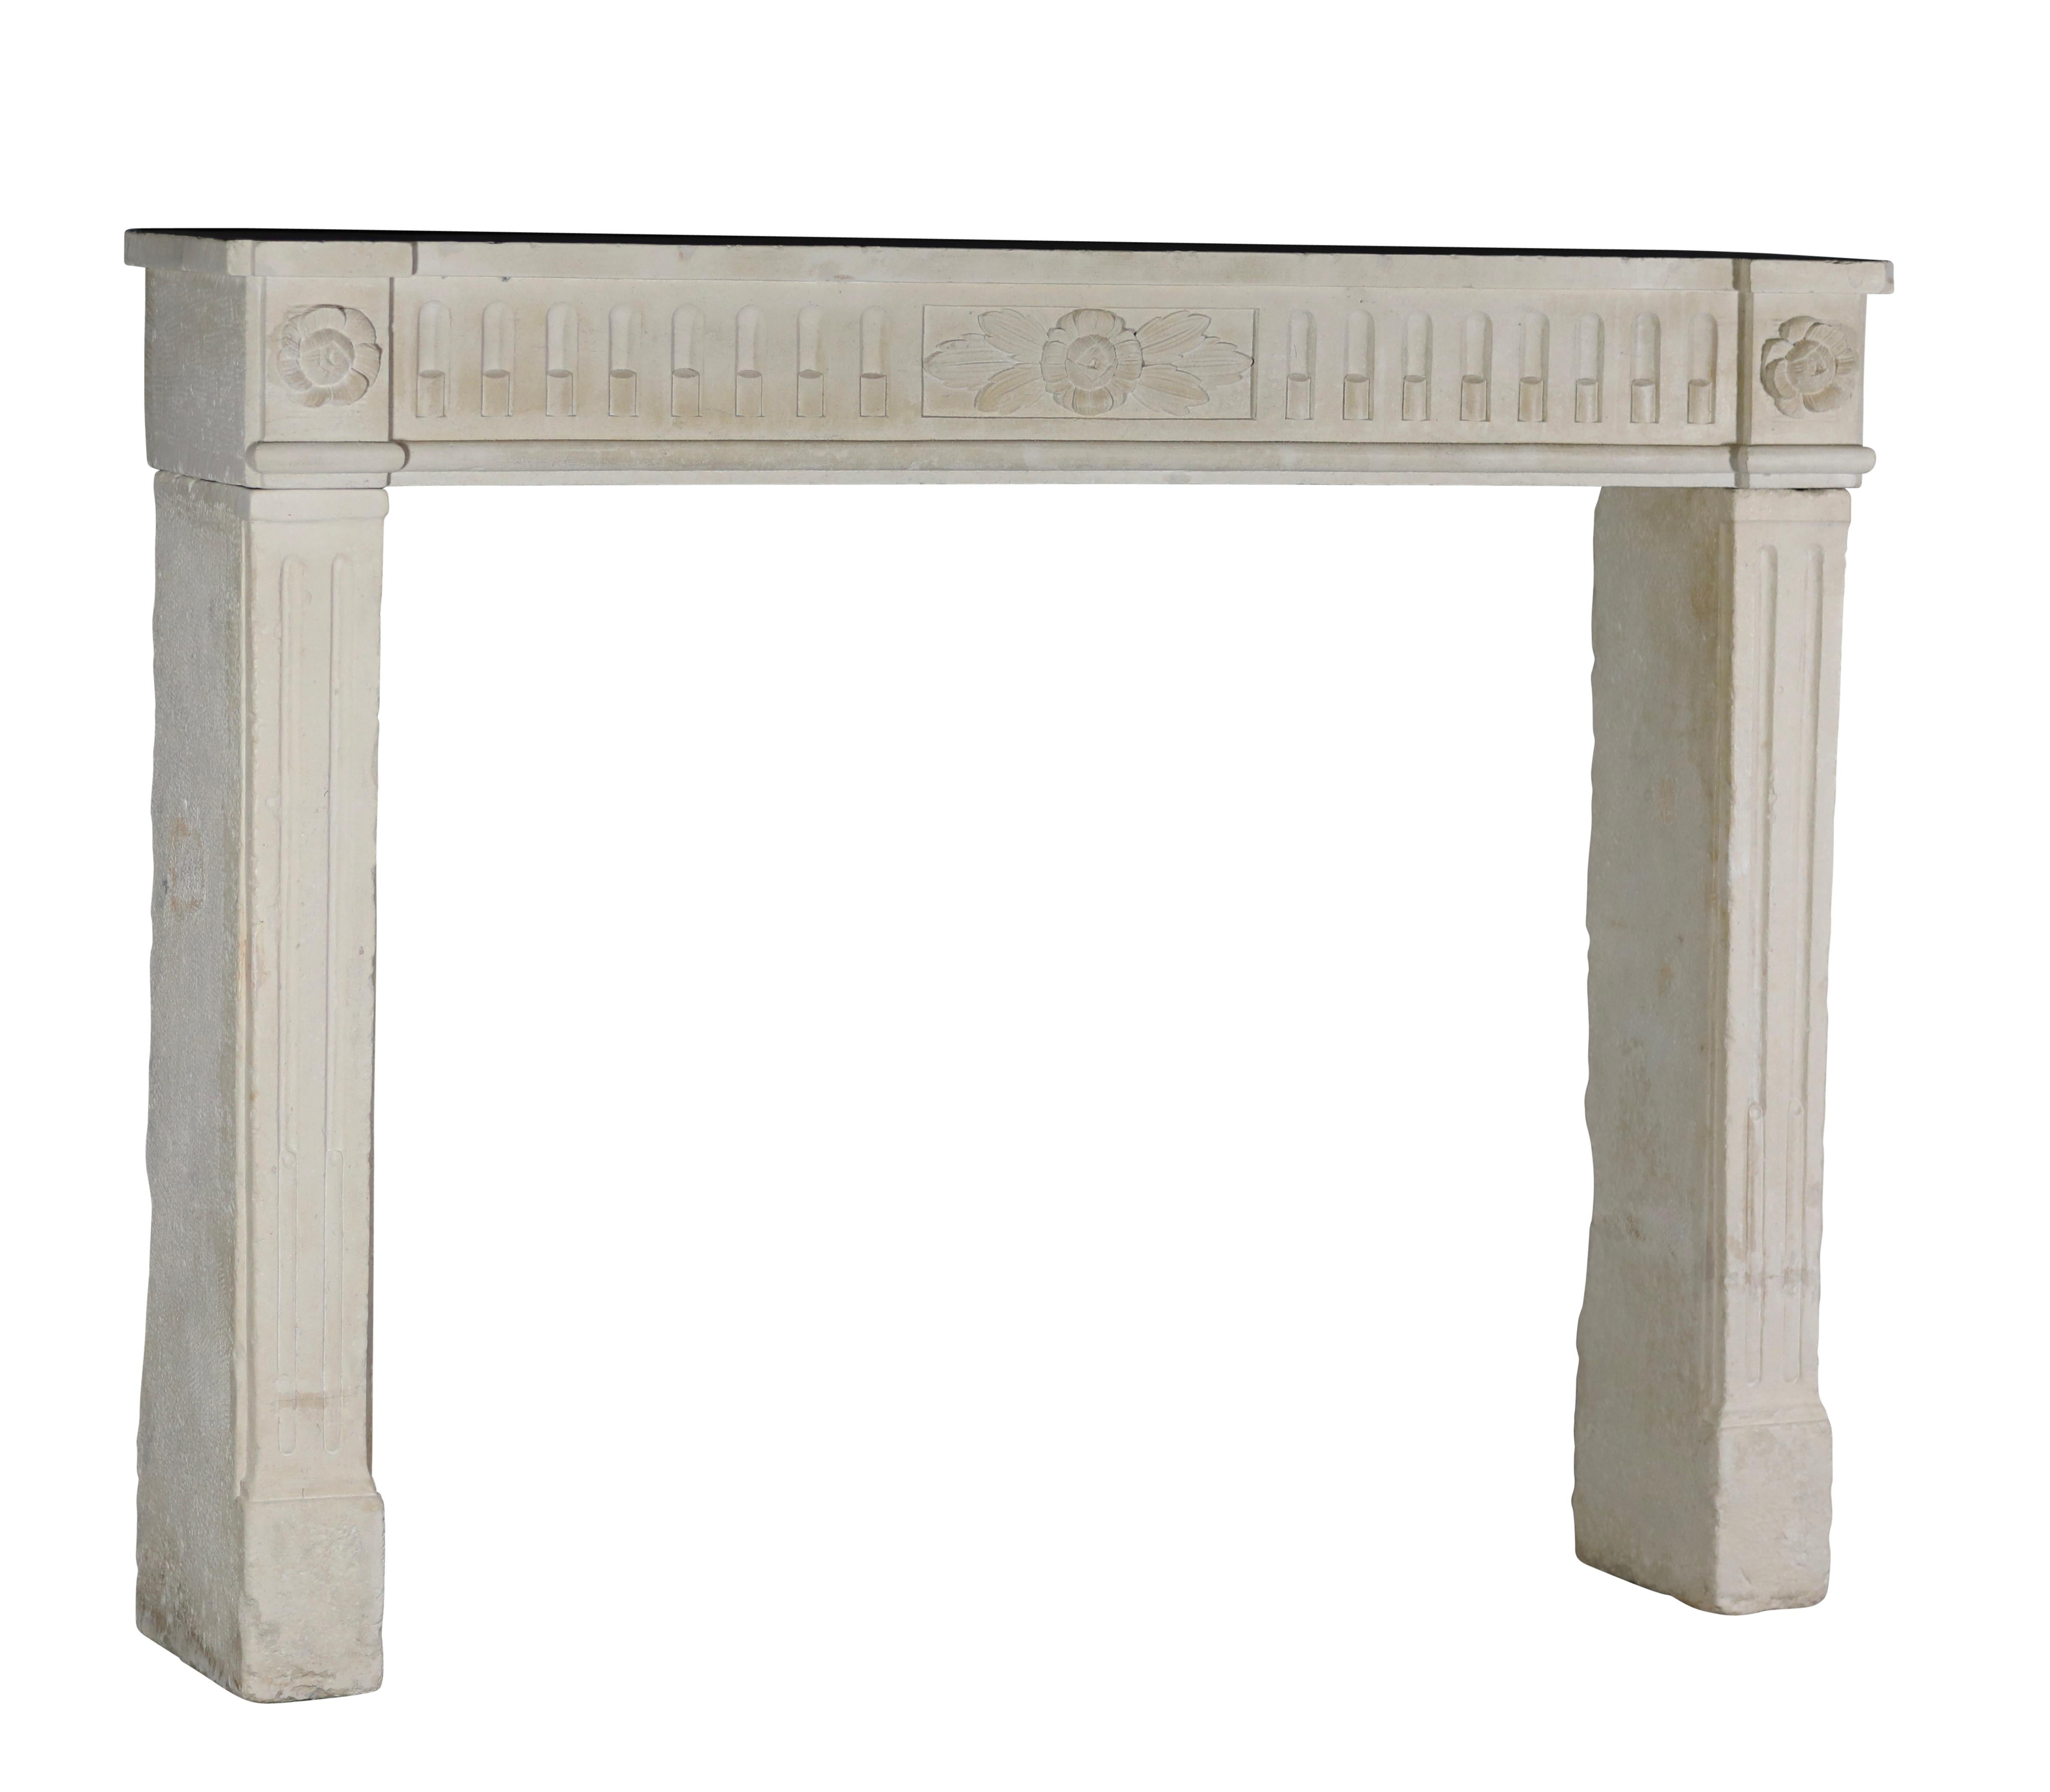 This fine Louis XVI antique fireplace surround in French limestone is in great condition.
Original and one of a kind mantle, a real work of art, with floral details on the front of the 18th century. Original wear and condition. Admire all